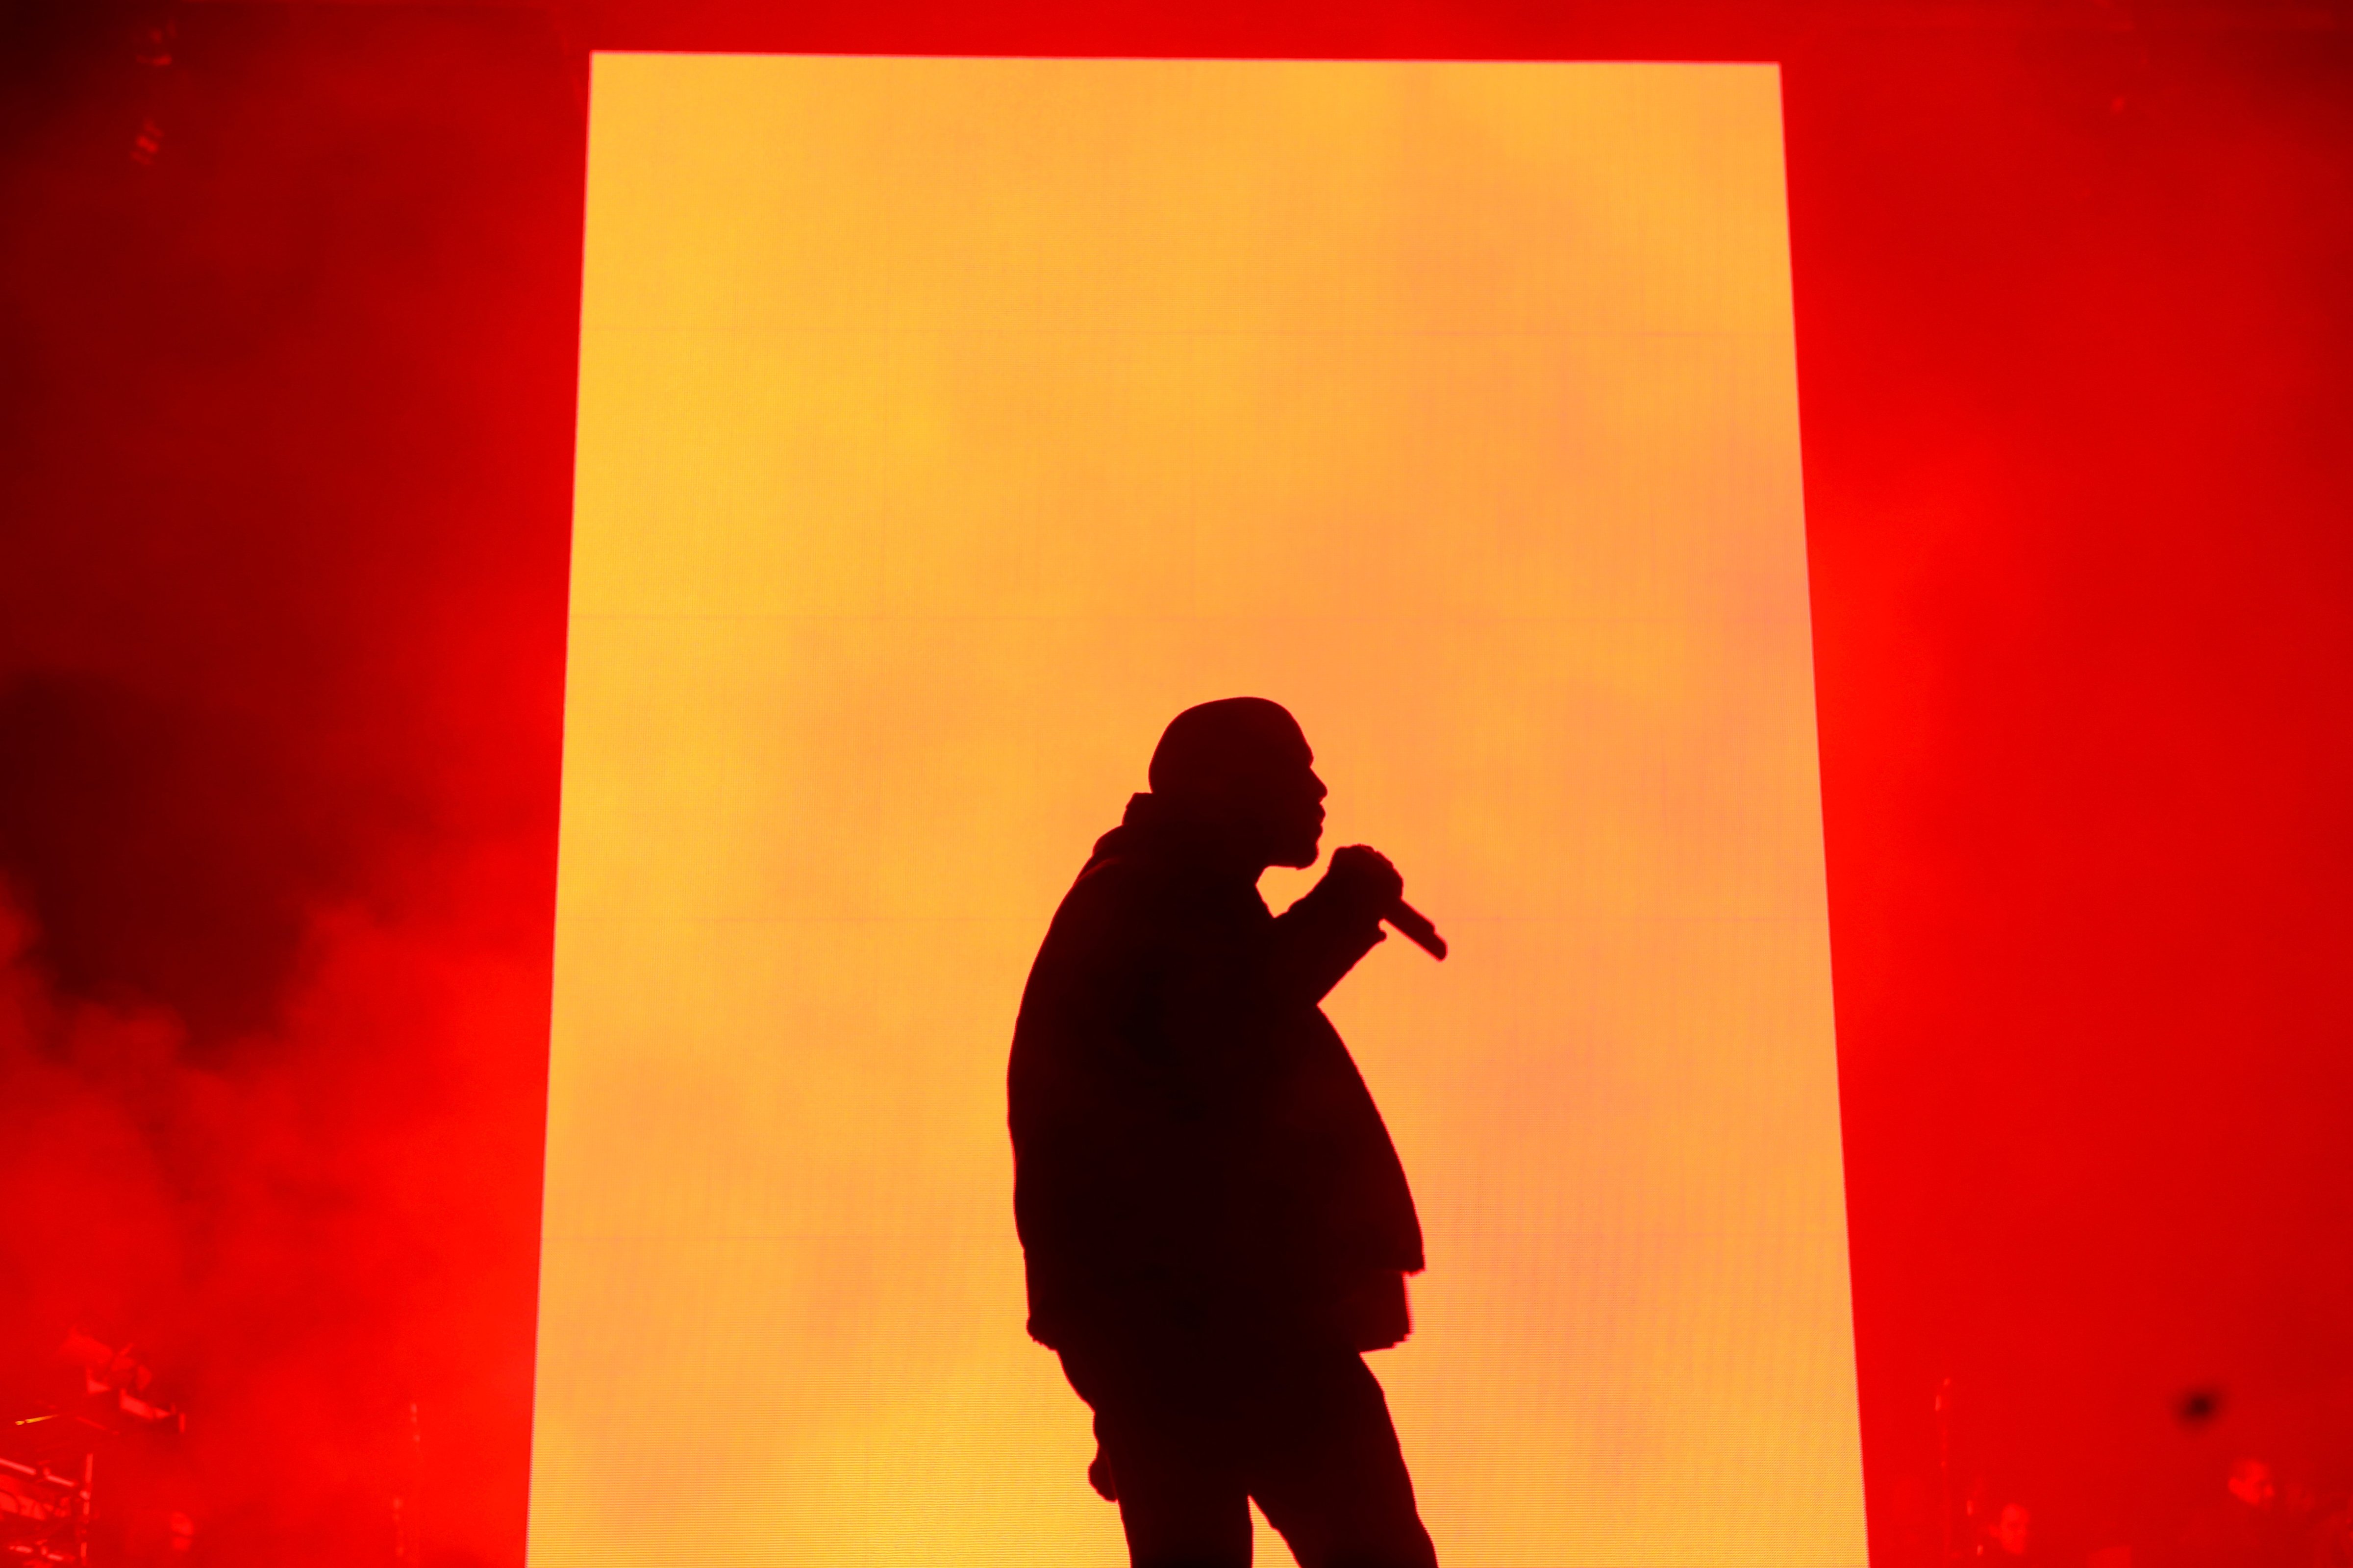 Kanye West performs during ROC NATION SPORTS 1st Annual Roc City Classic starring Kevin Durant x Kanye West on Feb. 12, 2015 in New York City.